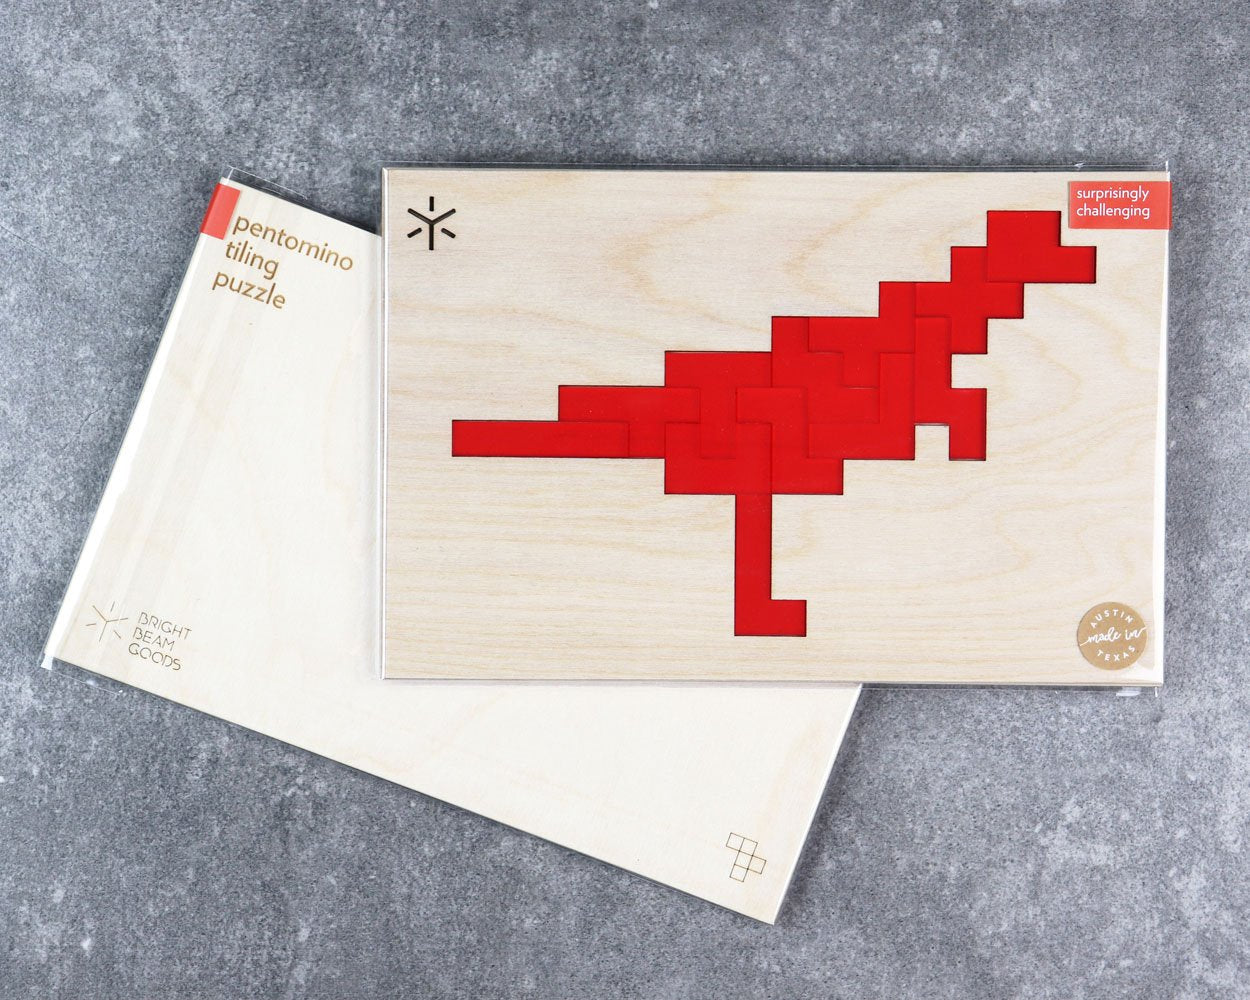 T-rex pentomino puzzle in packaging